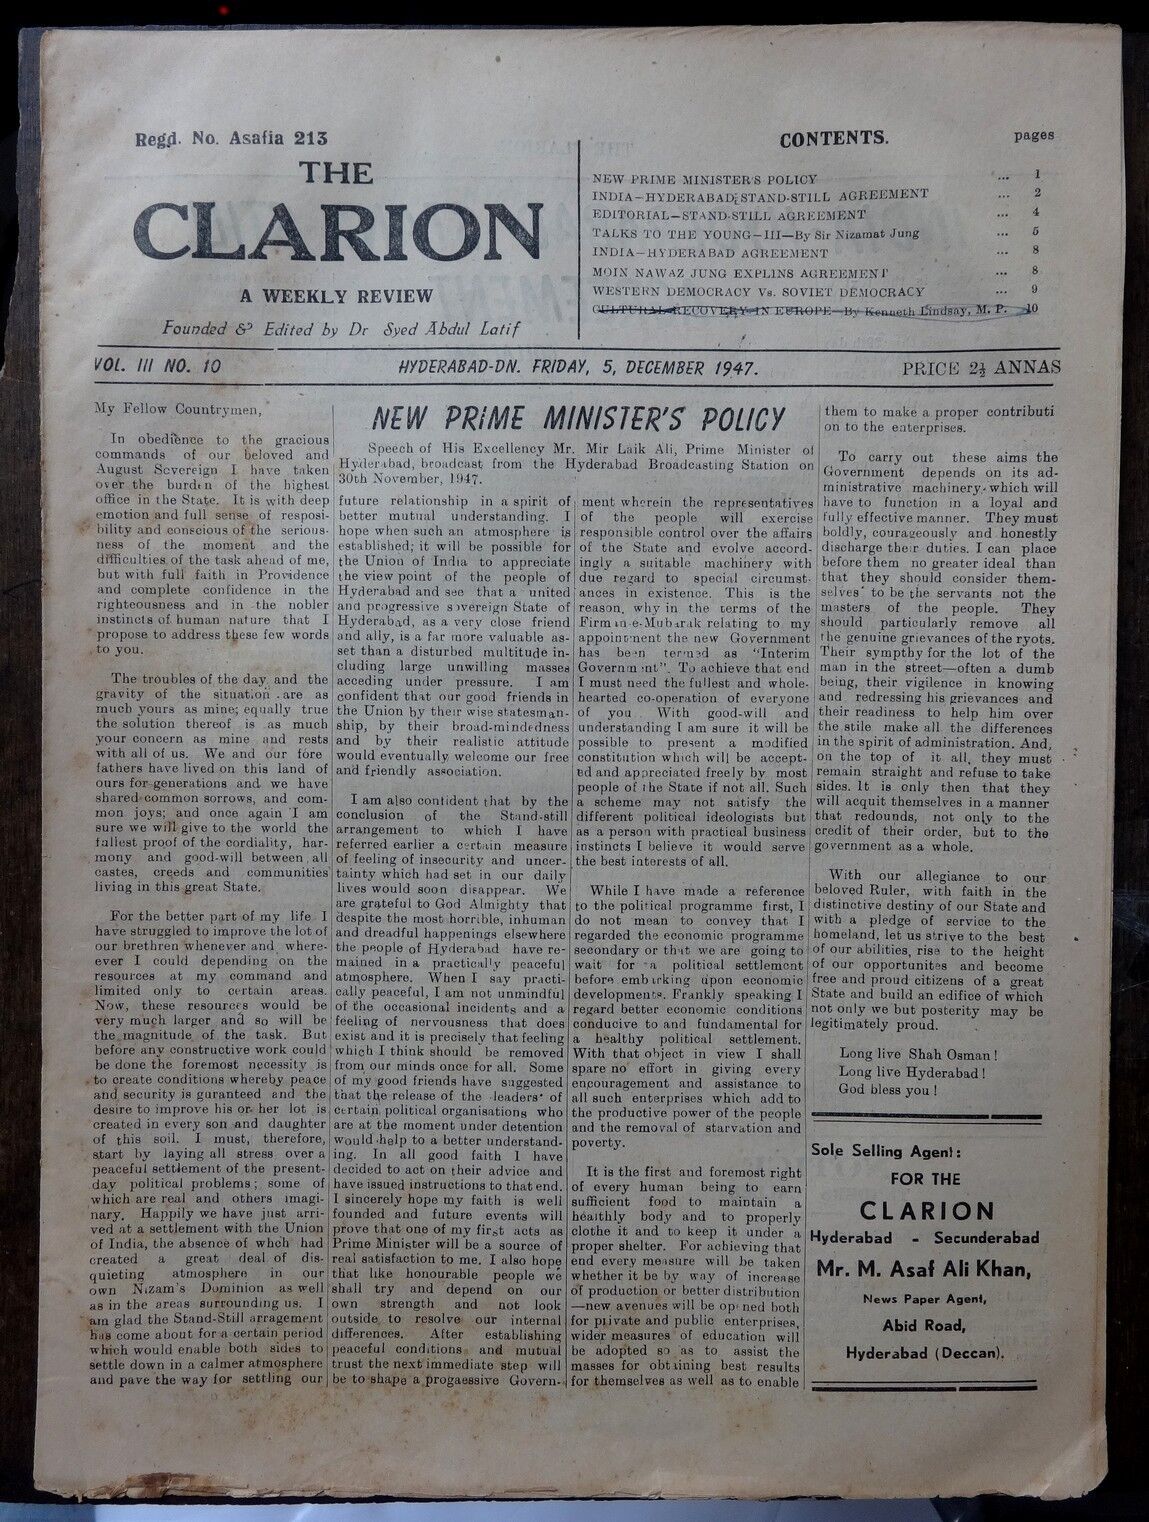 Clarion – A Hyderabad daily 5 Dec 1947 NEW PRIME MINISTER’S POLICY